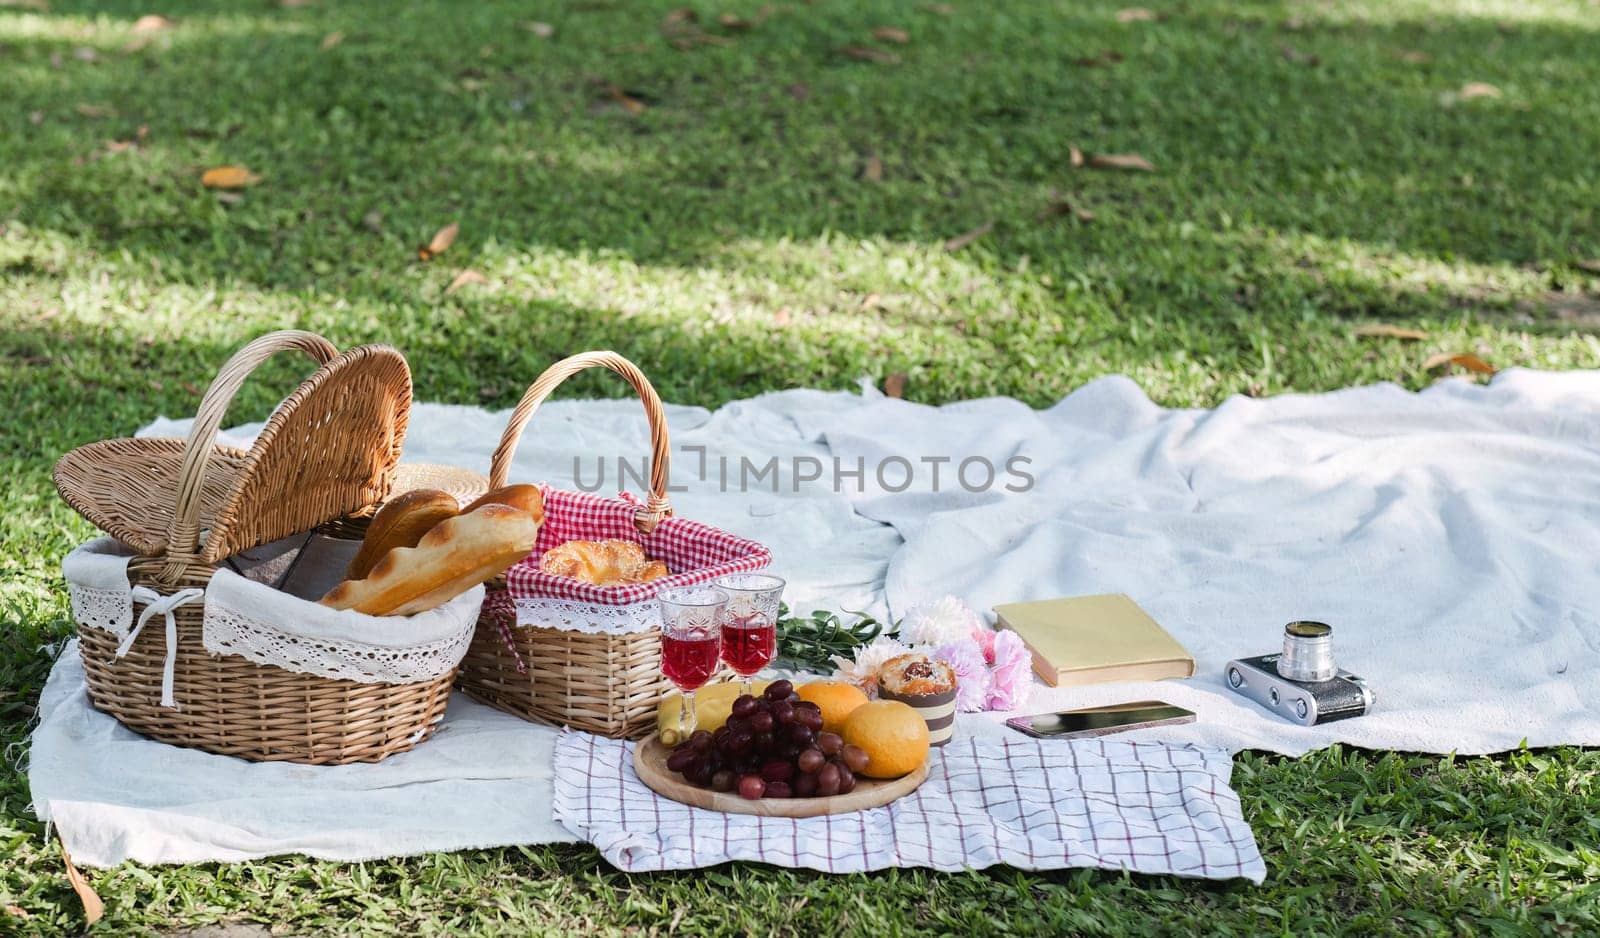 Picnic basket with products and two glasses of wine on a checkered blanket in the park.